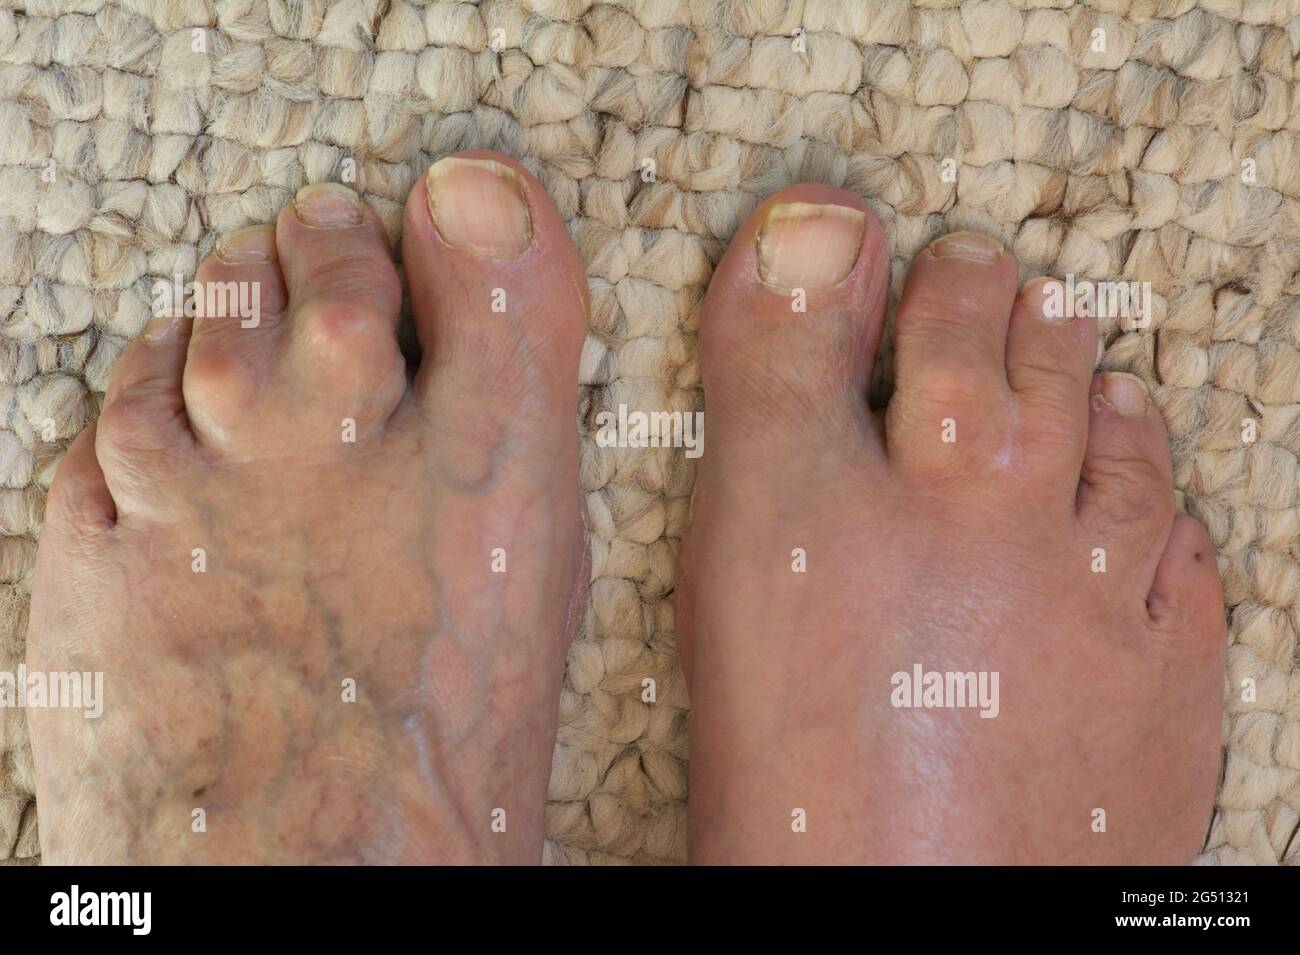 Woman's feet displaying webbed toes, varicose veins and in one foot, cellulitis Stock Photo